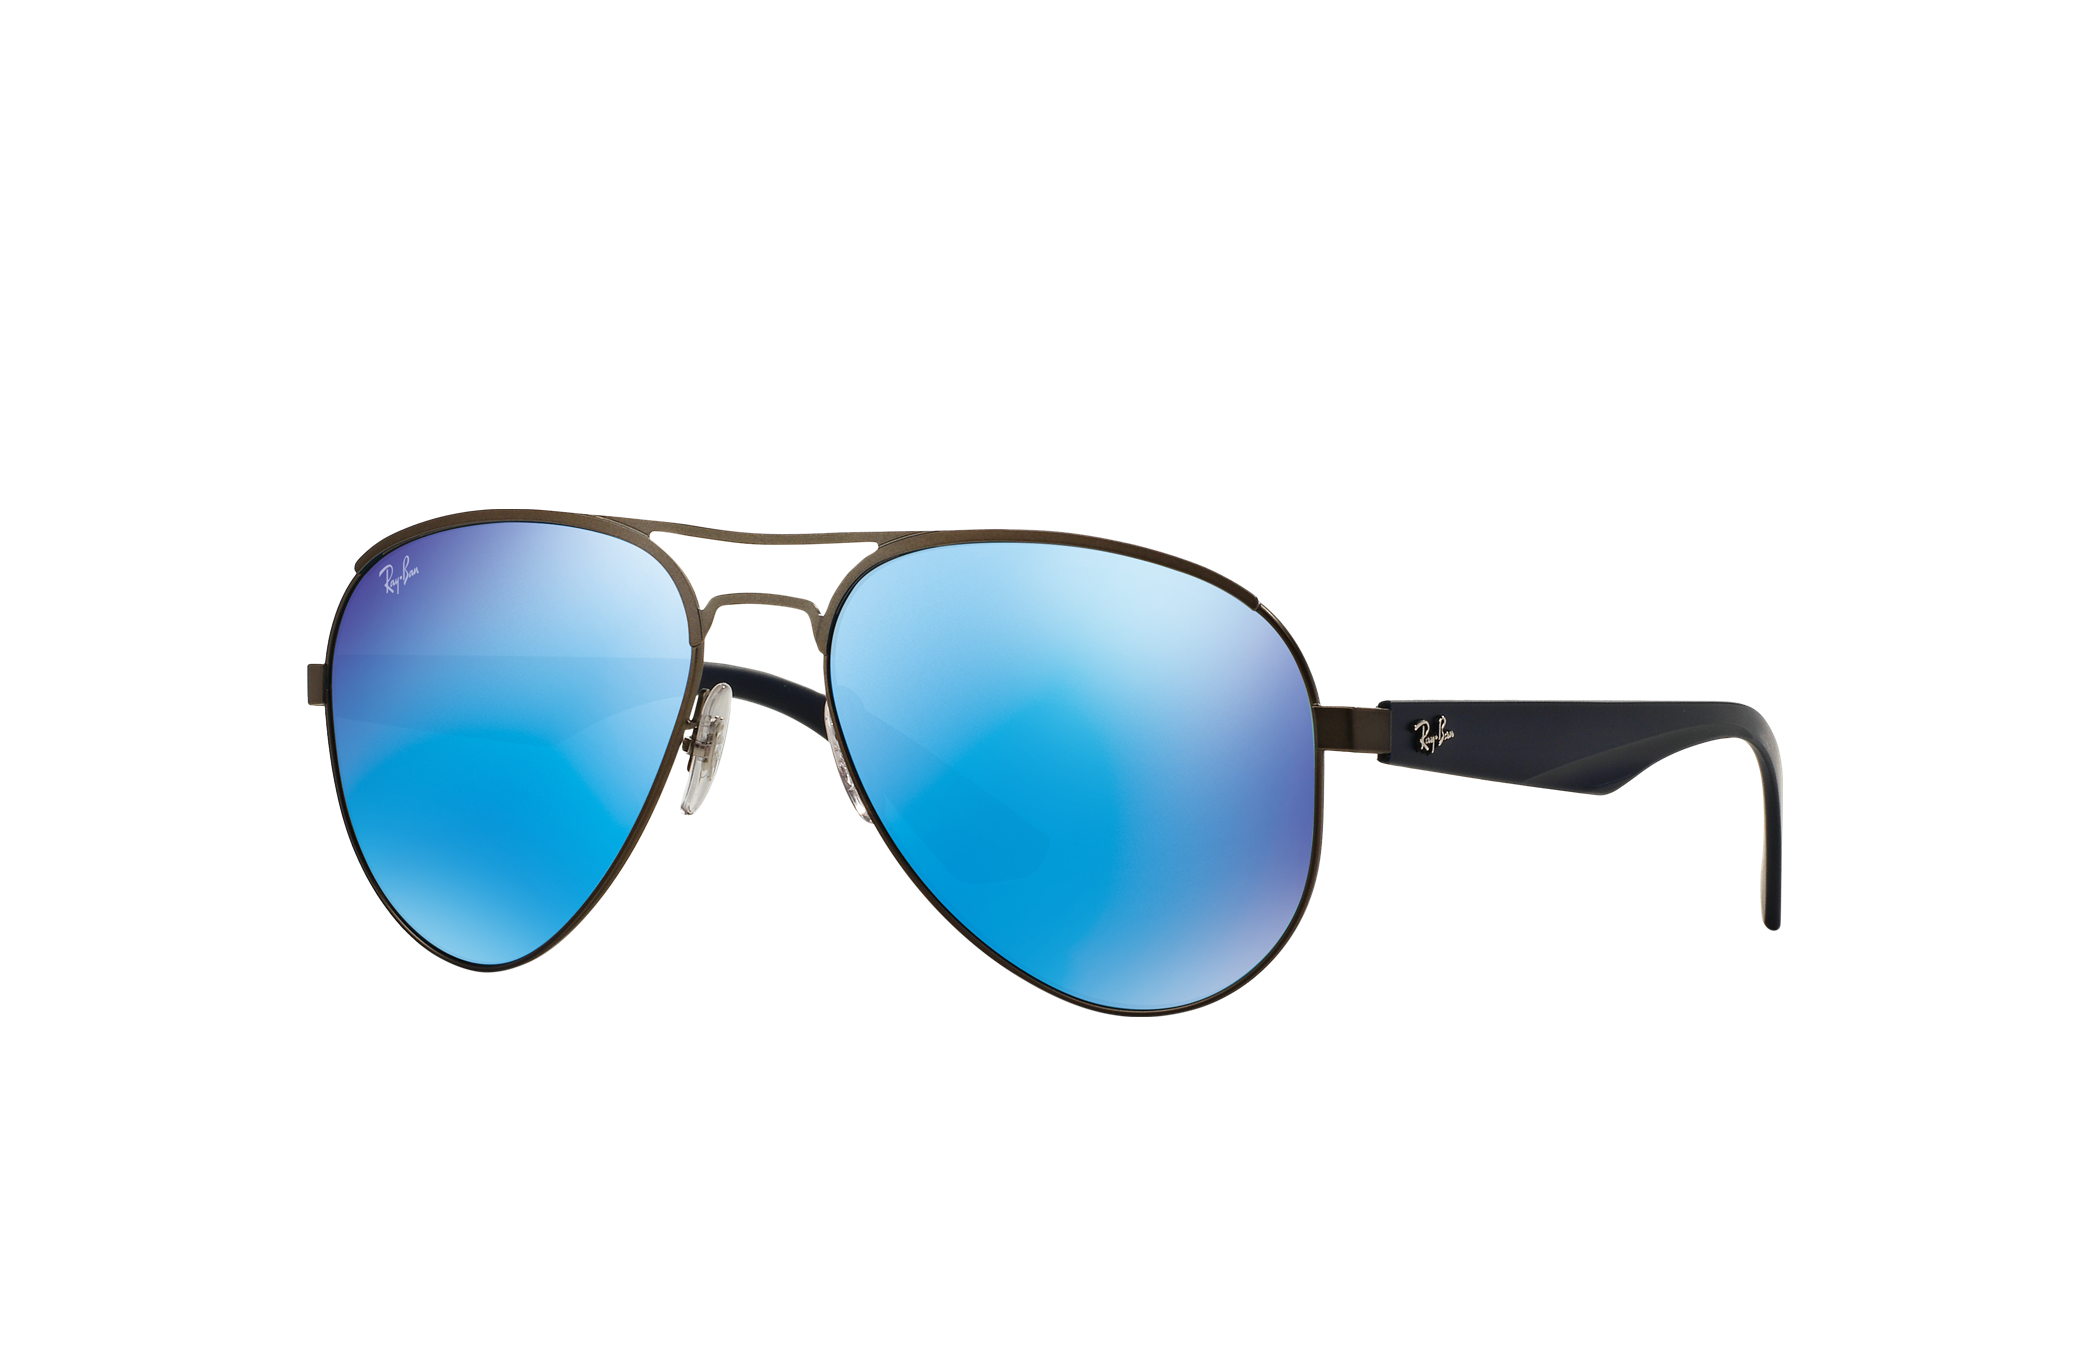 Rb3523 Sunglasses in Gunmetal and Blue - RB3523 | Ray-Ban®